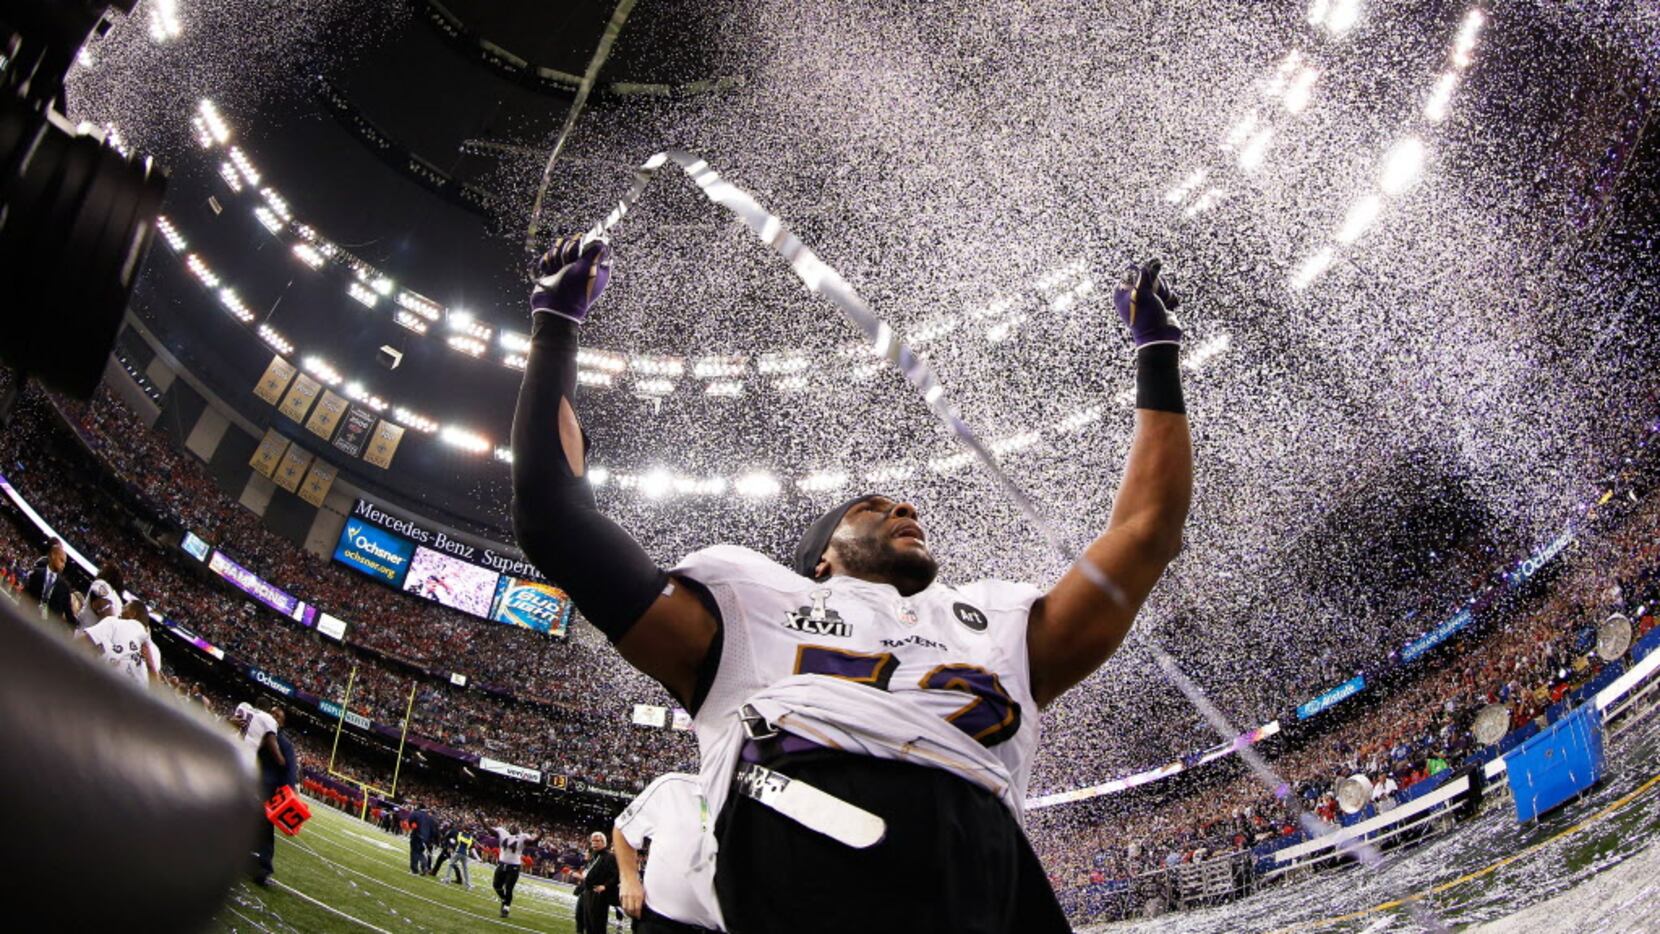 Ravens survive 49ers' post-power outage rally to win Super Bowl